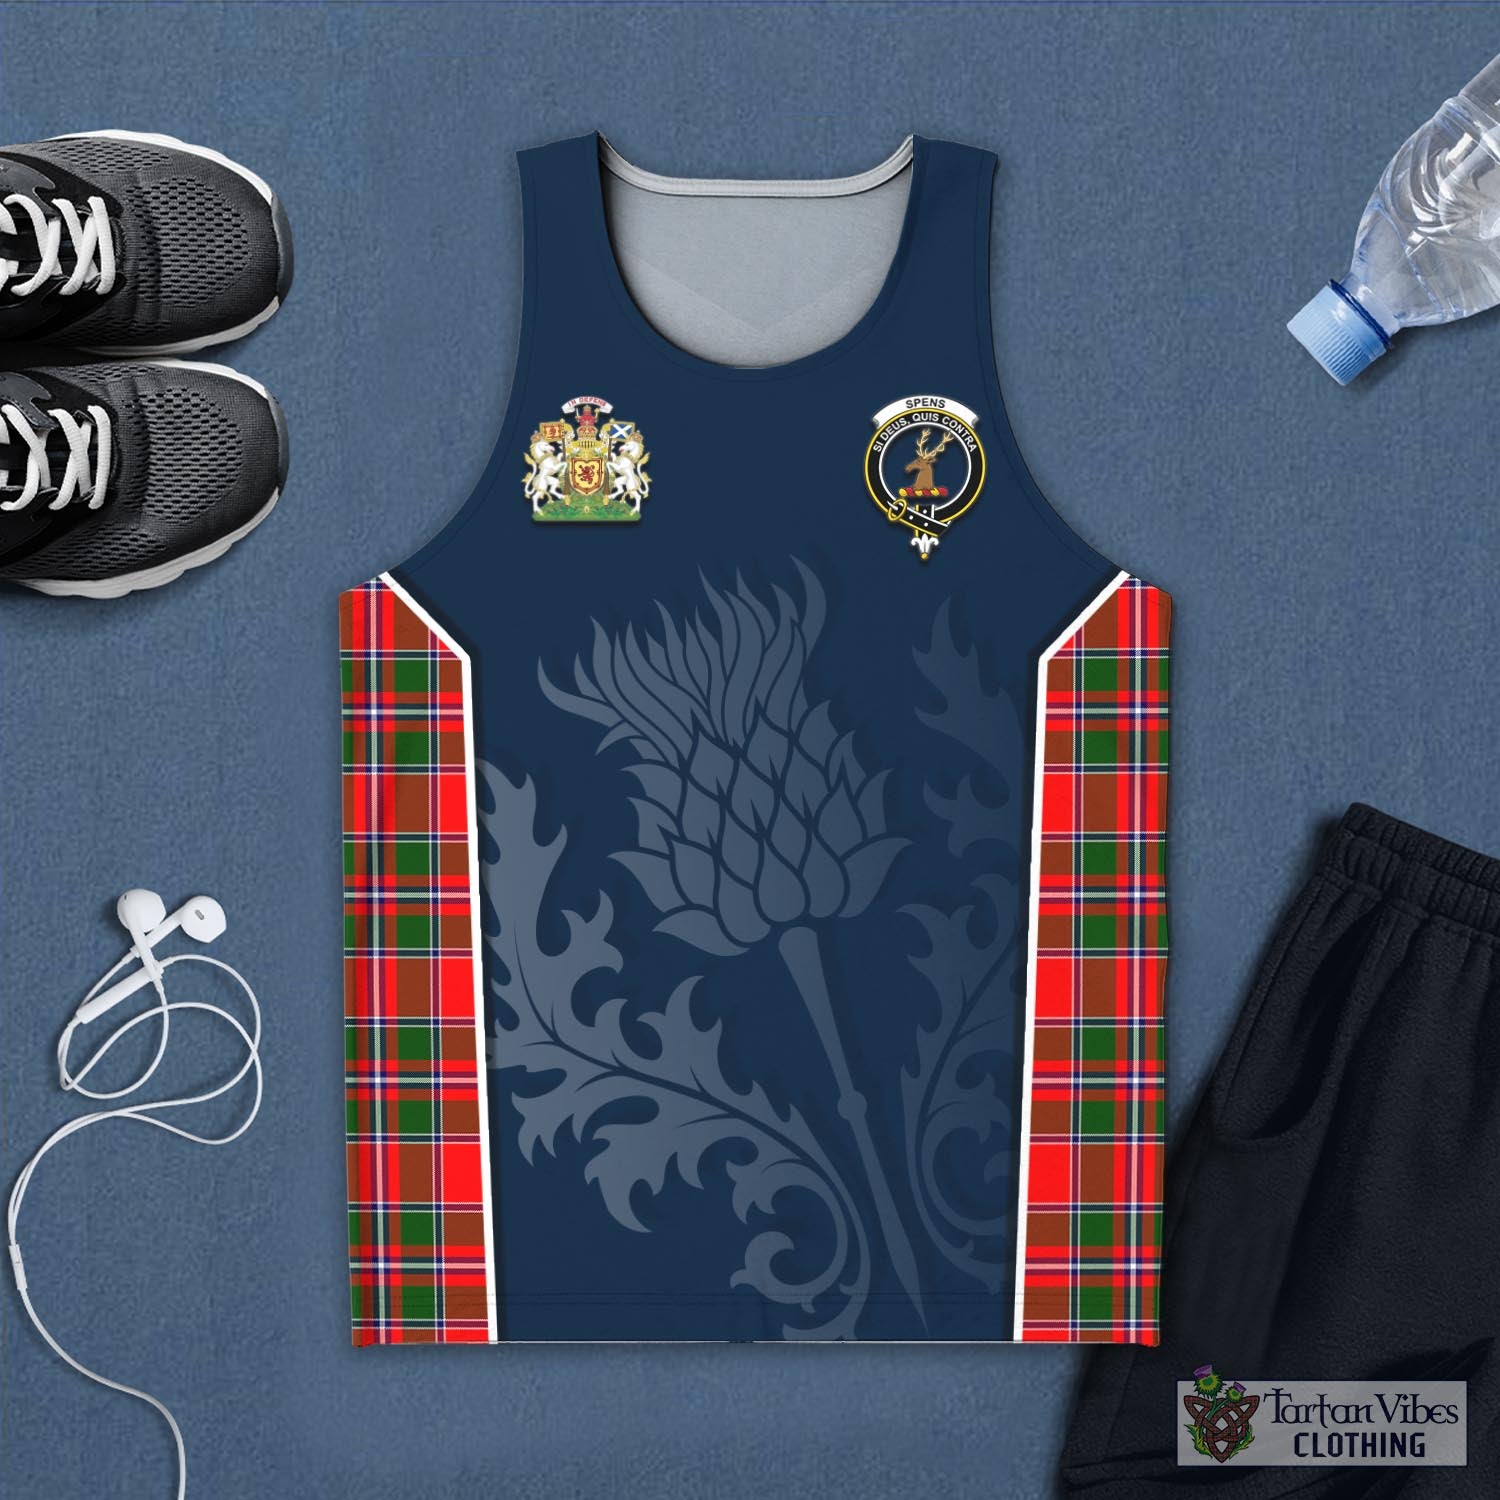 Tartan Vibes Clothing Spens Modern Tartan Men's Tanks Top with Family Crest and Scottish Thistle Vibes Sport Style